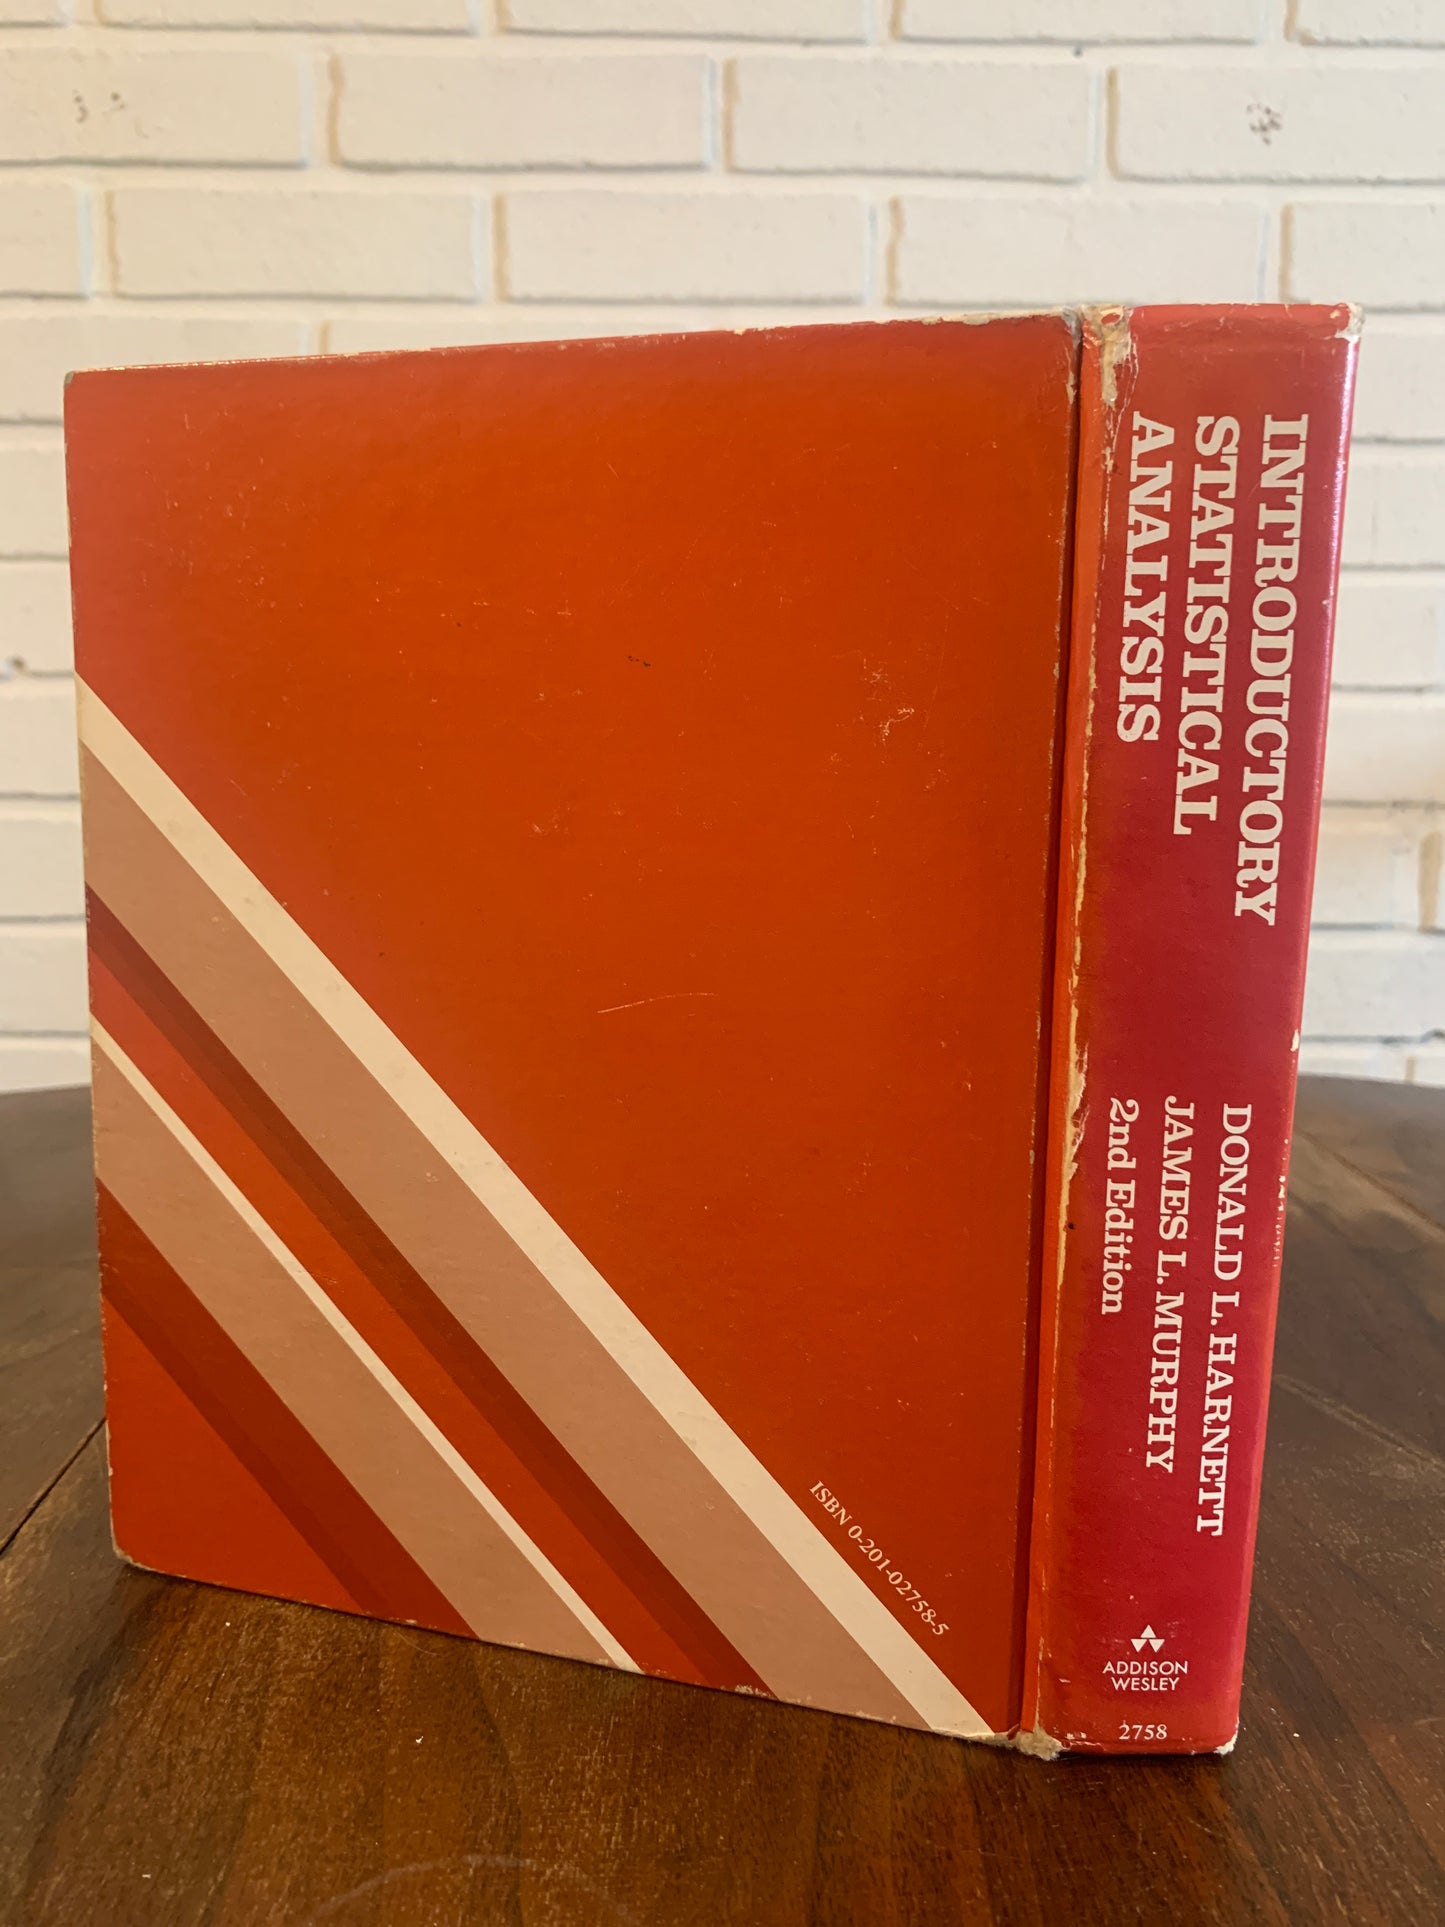 Introductory Statistical Analysis by Harnett & Murphy 1980